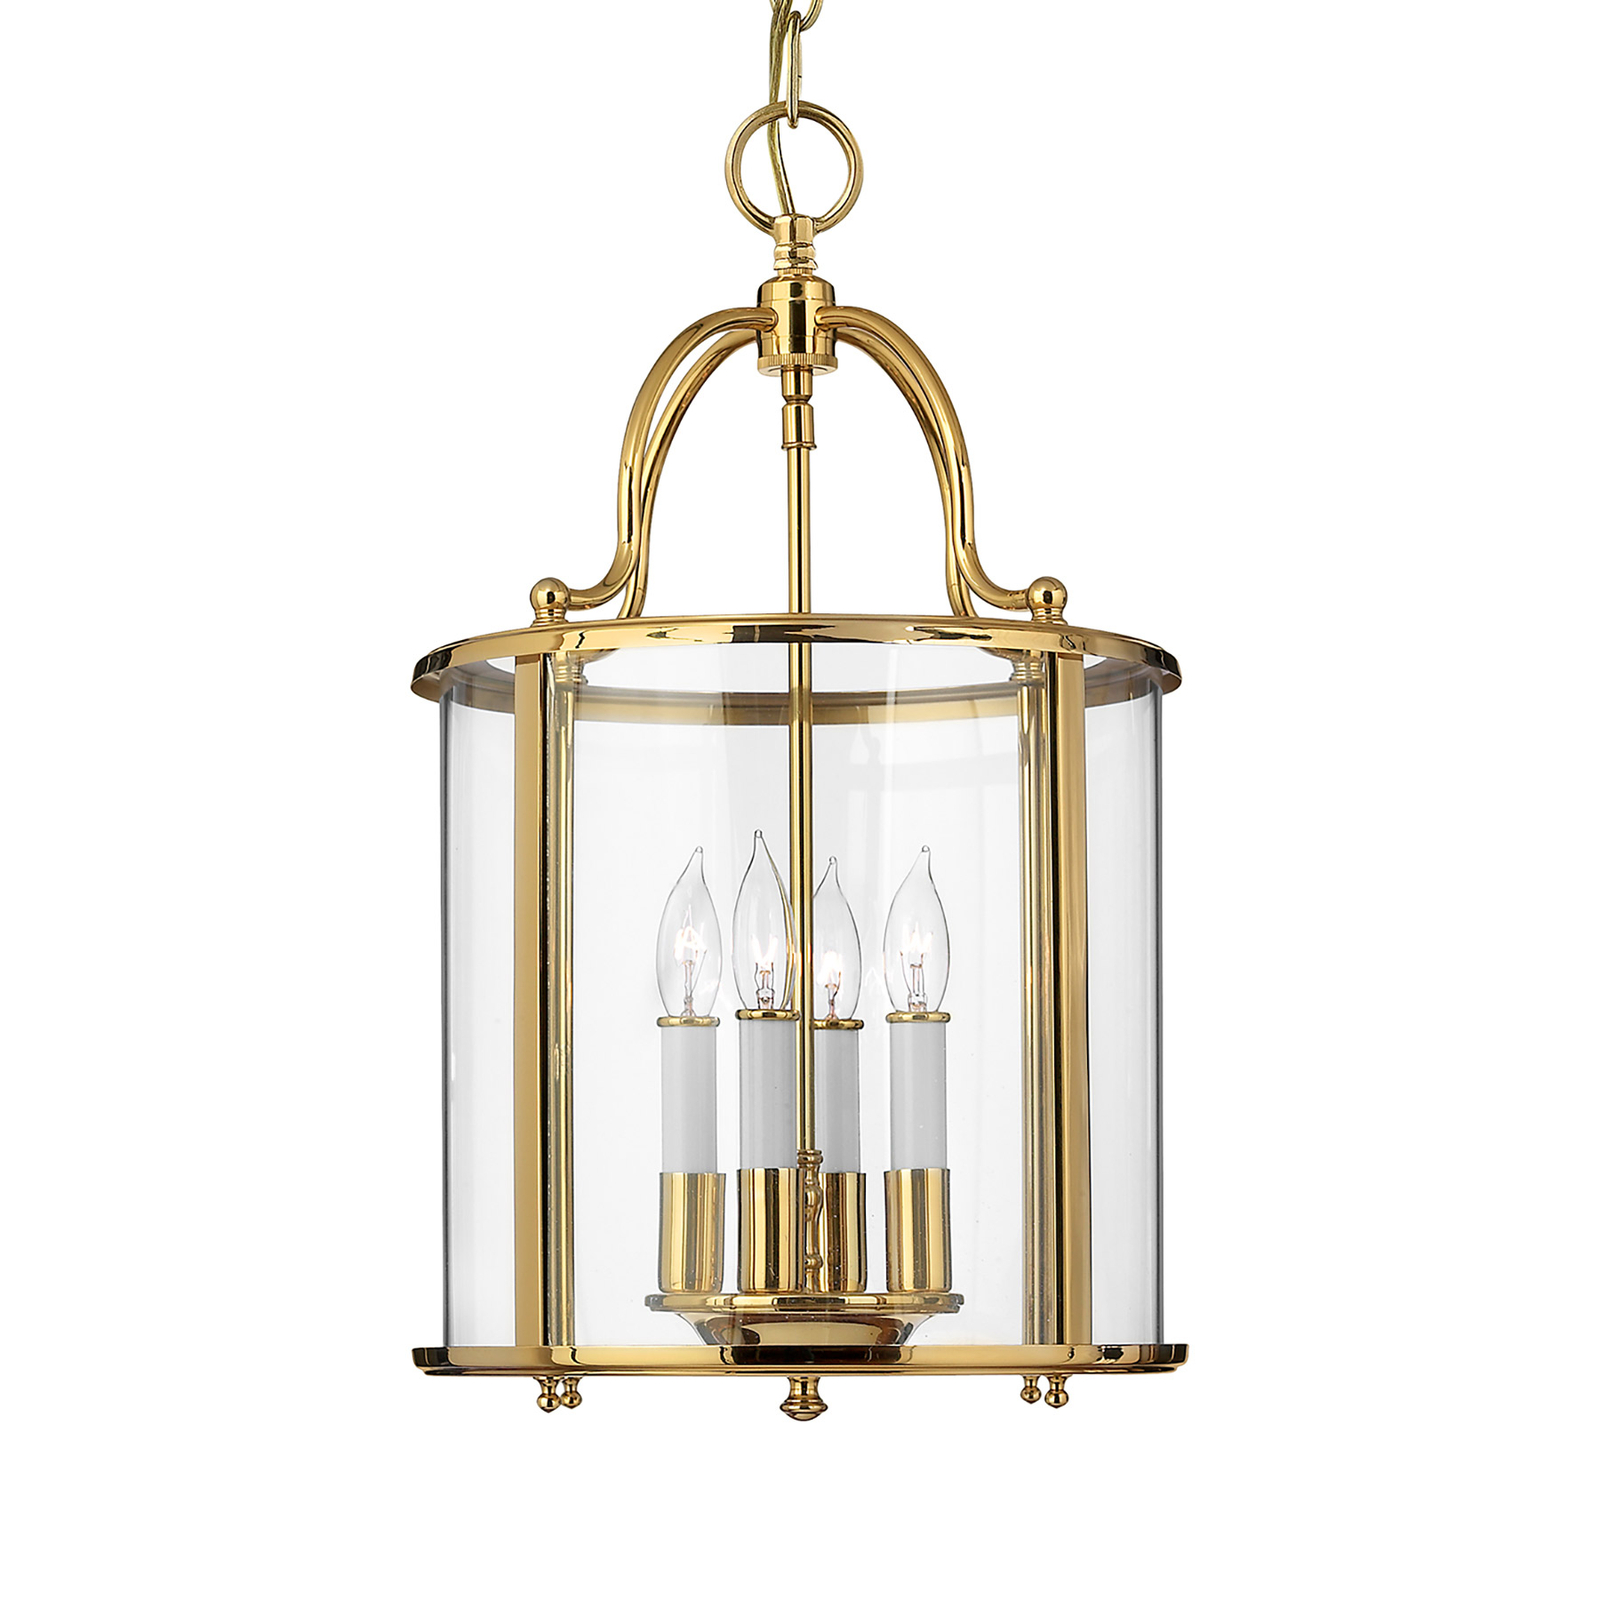 Gentry pendant light, 4xE14, polished brass/clear